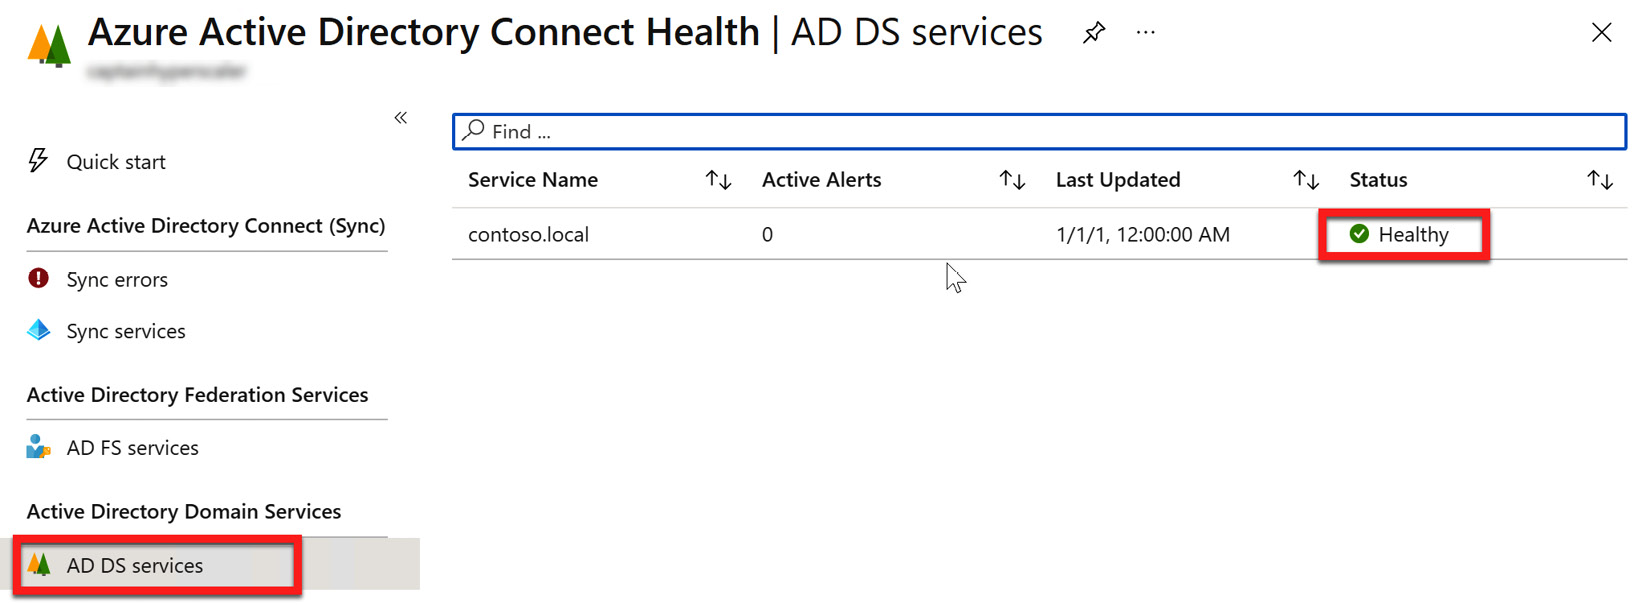 Figure 6.35 – Azure AD Connect Health Agent AD DS services' status
